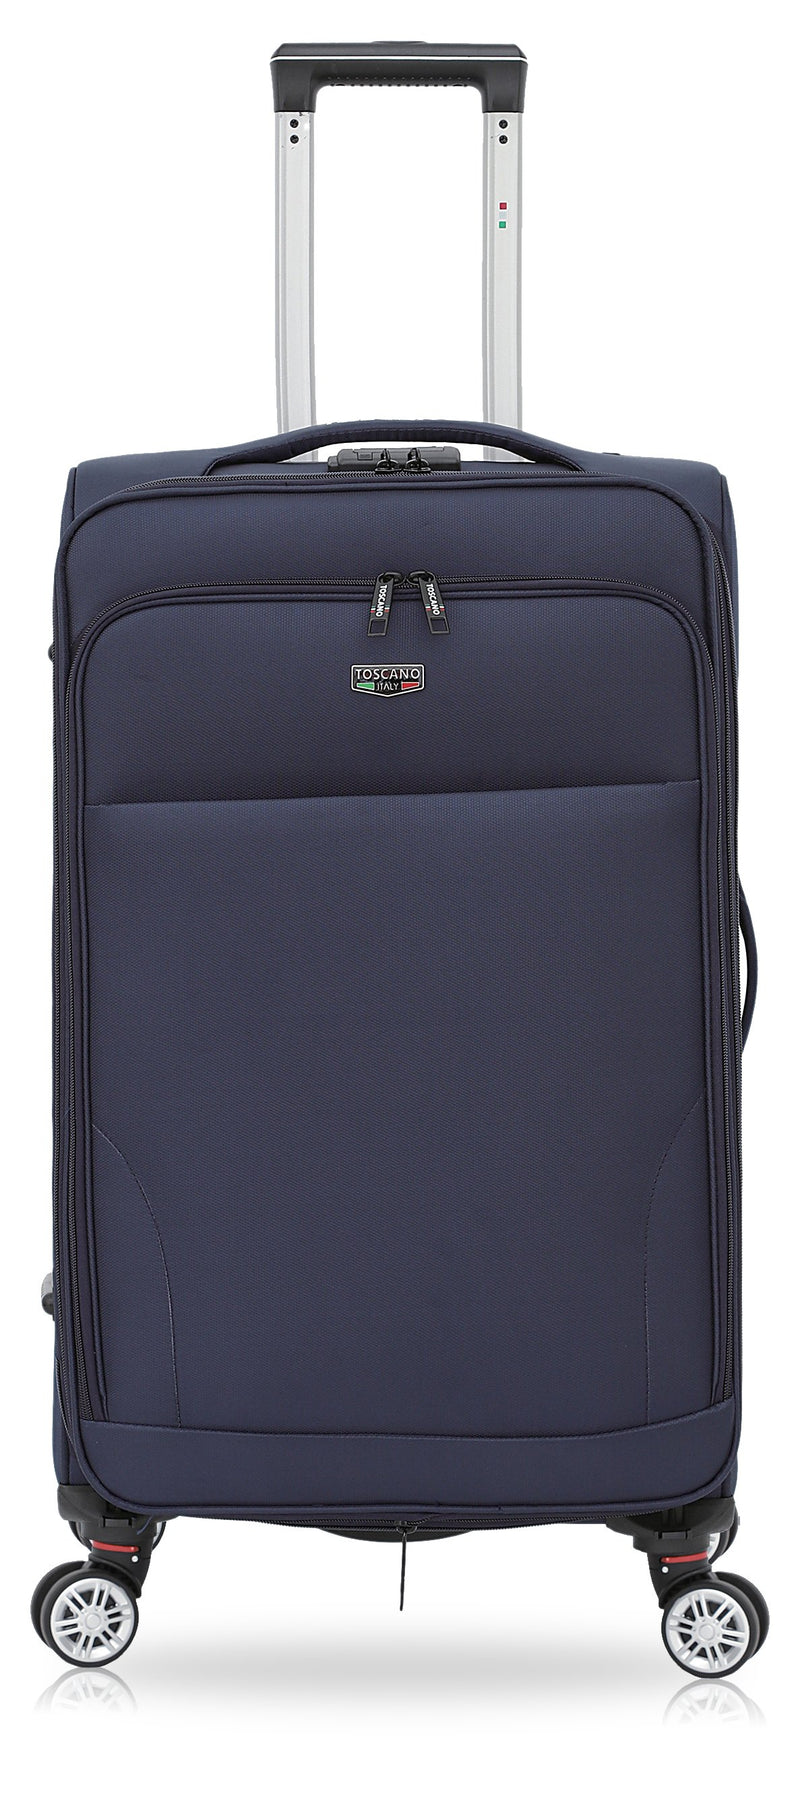 TOSCANO by Tucci 29-inch Ricerca Large Luggage Suitcase